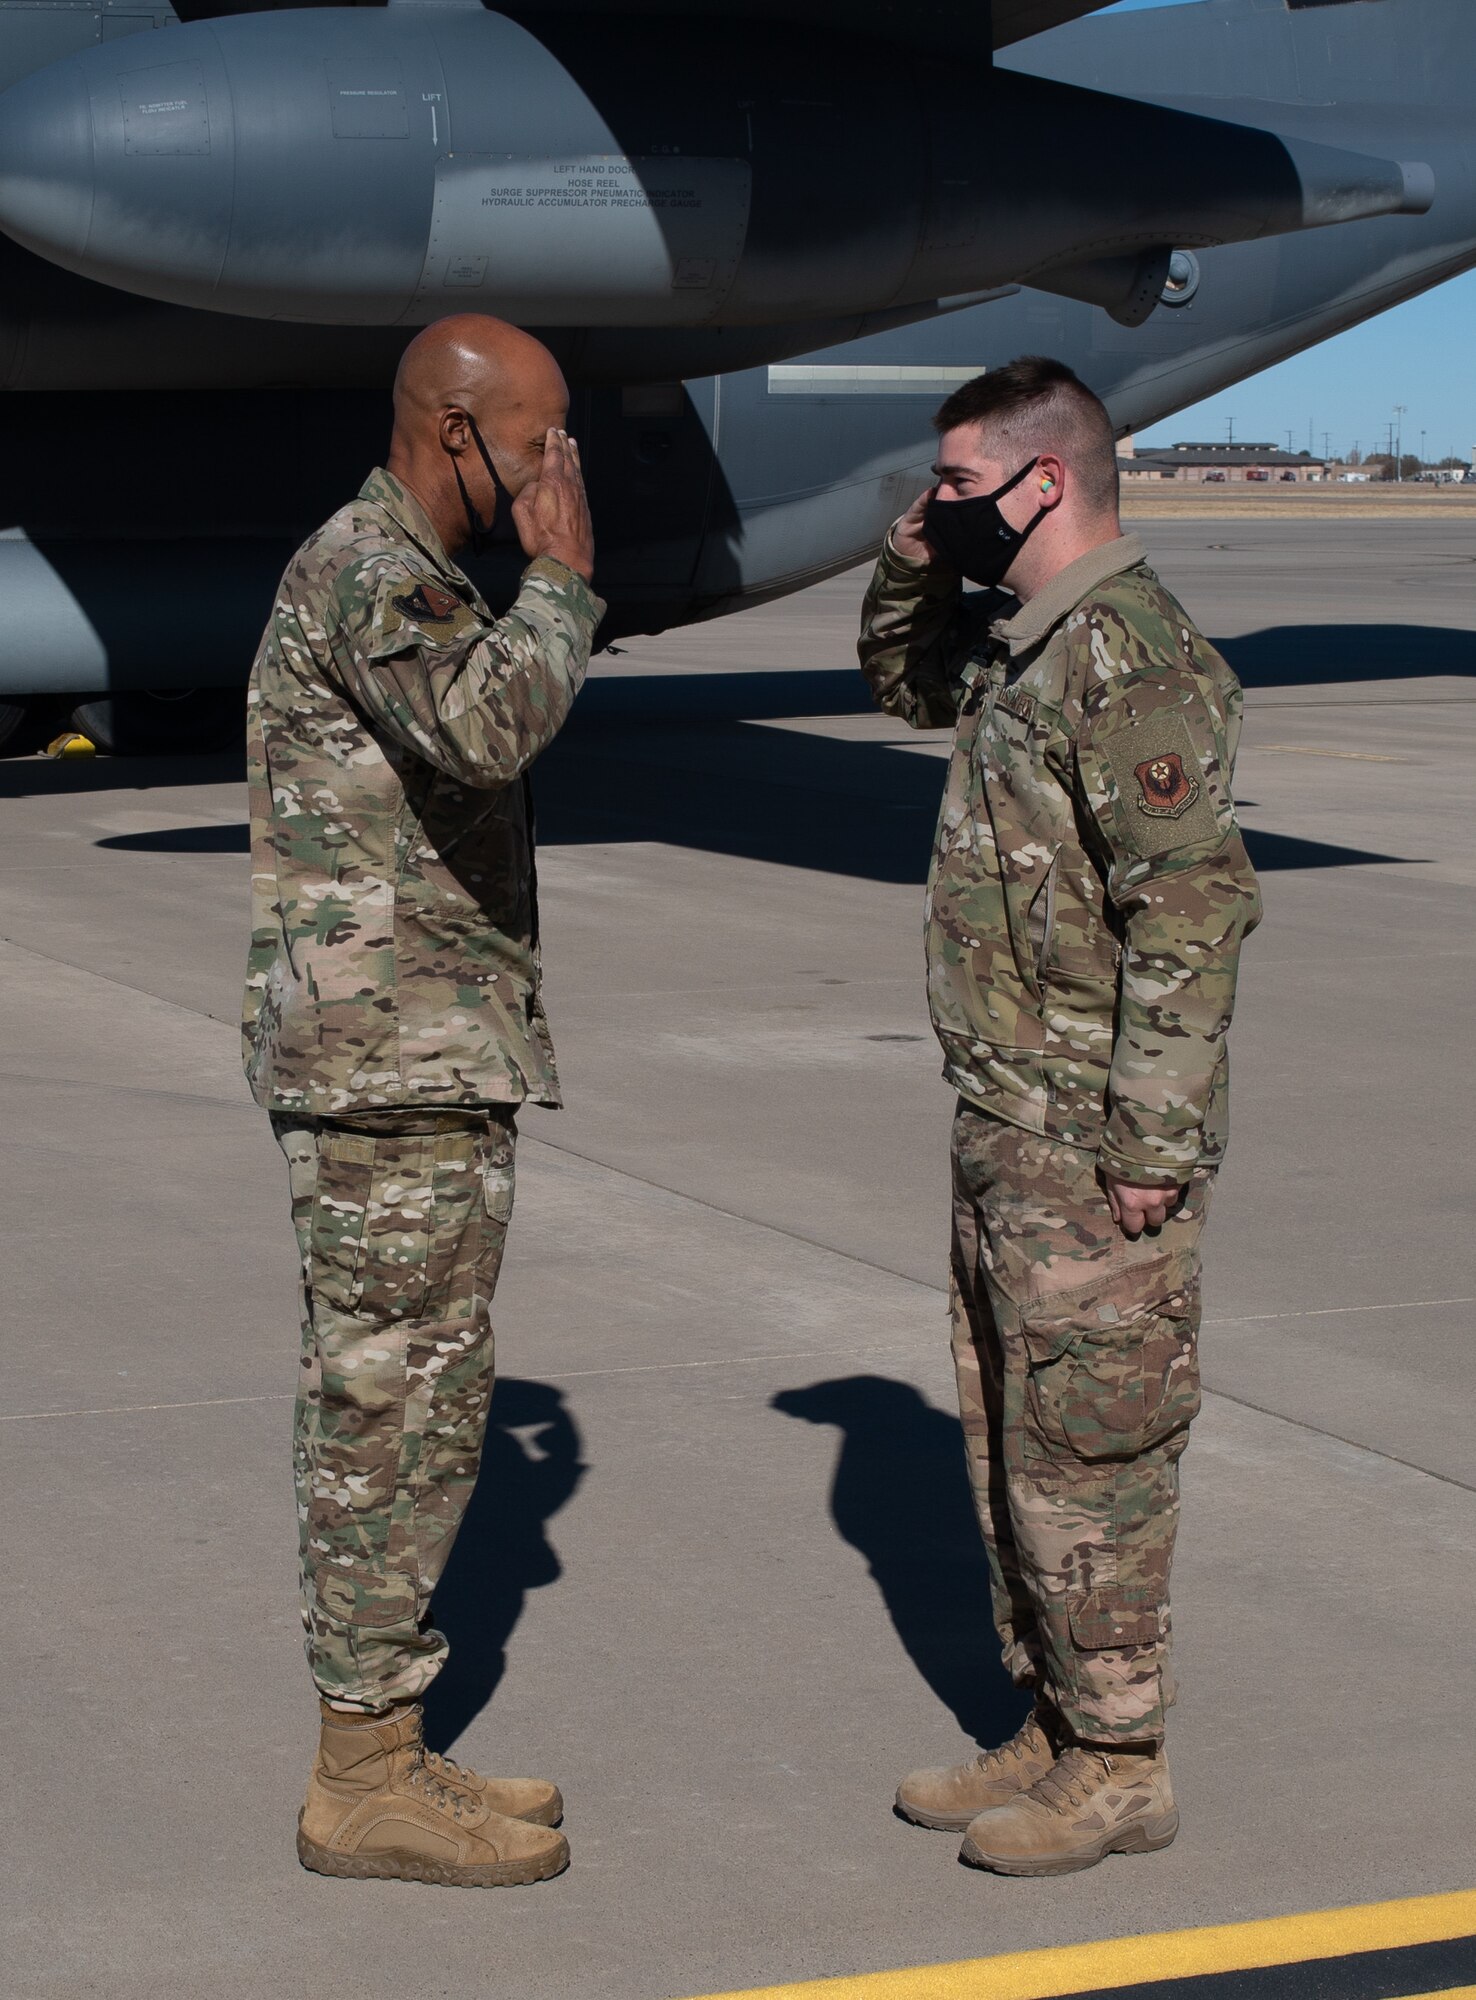 An Air Force Colonel salutes an Airman in front of a military cargo aircraft.